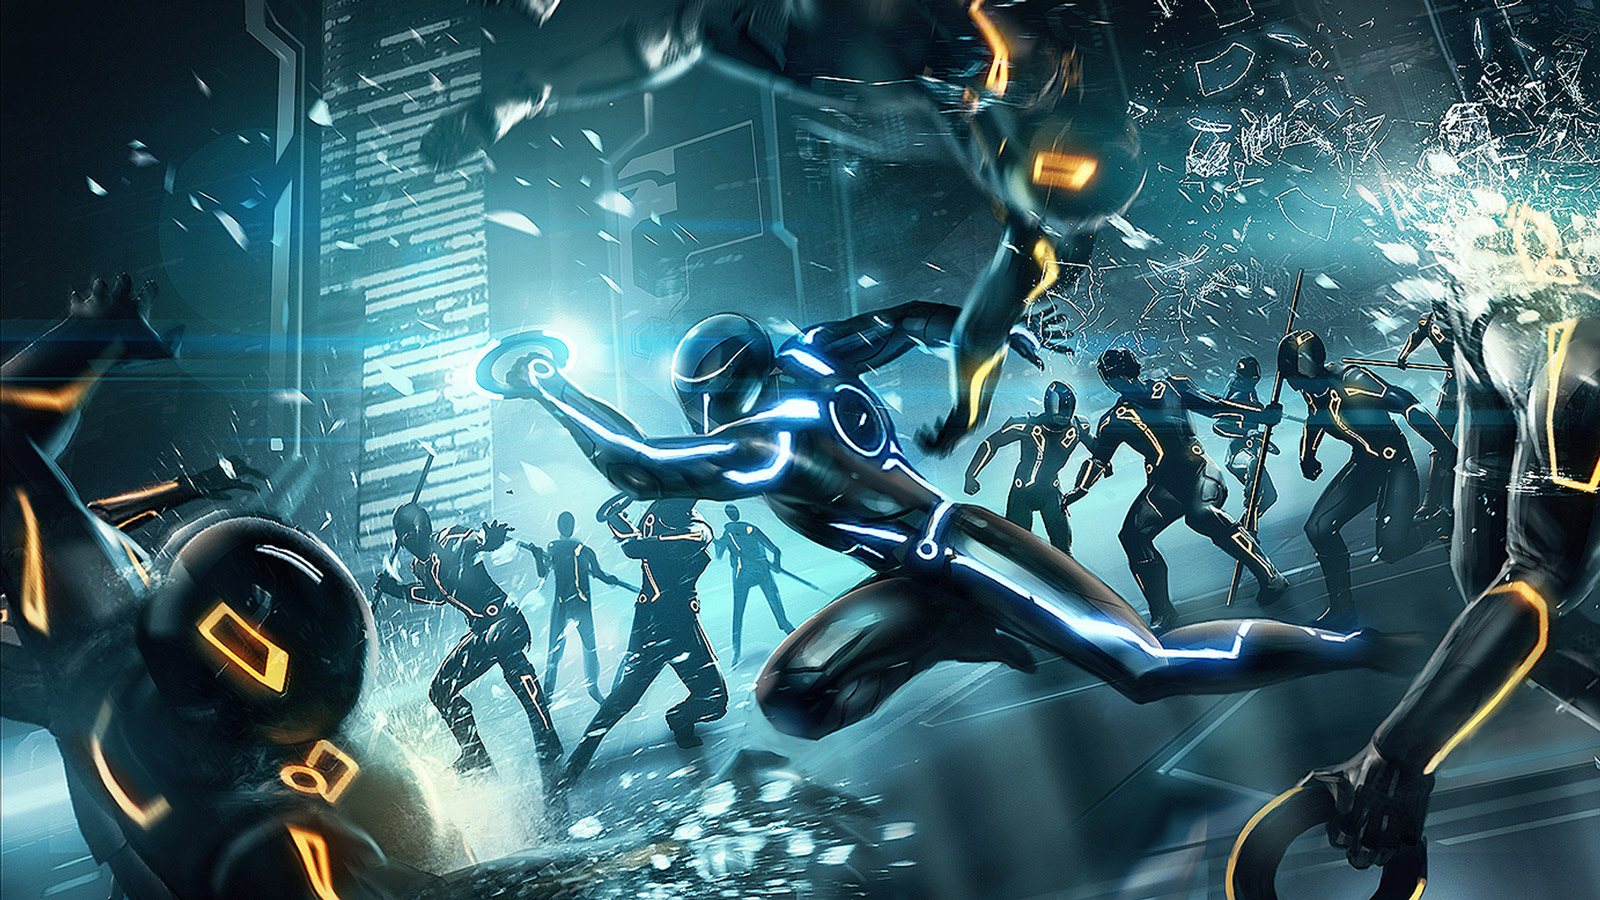 TRON: Escape rated in Brazil for PS4, Xbox One and PC